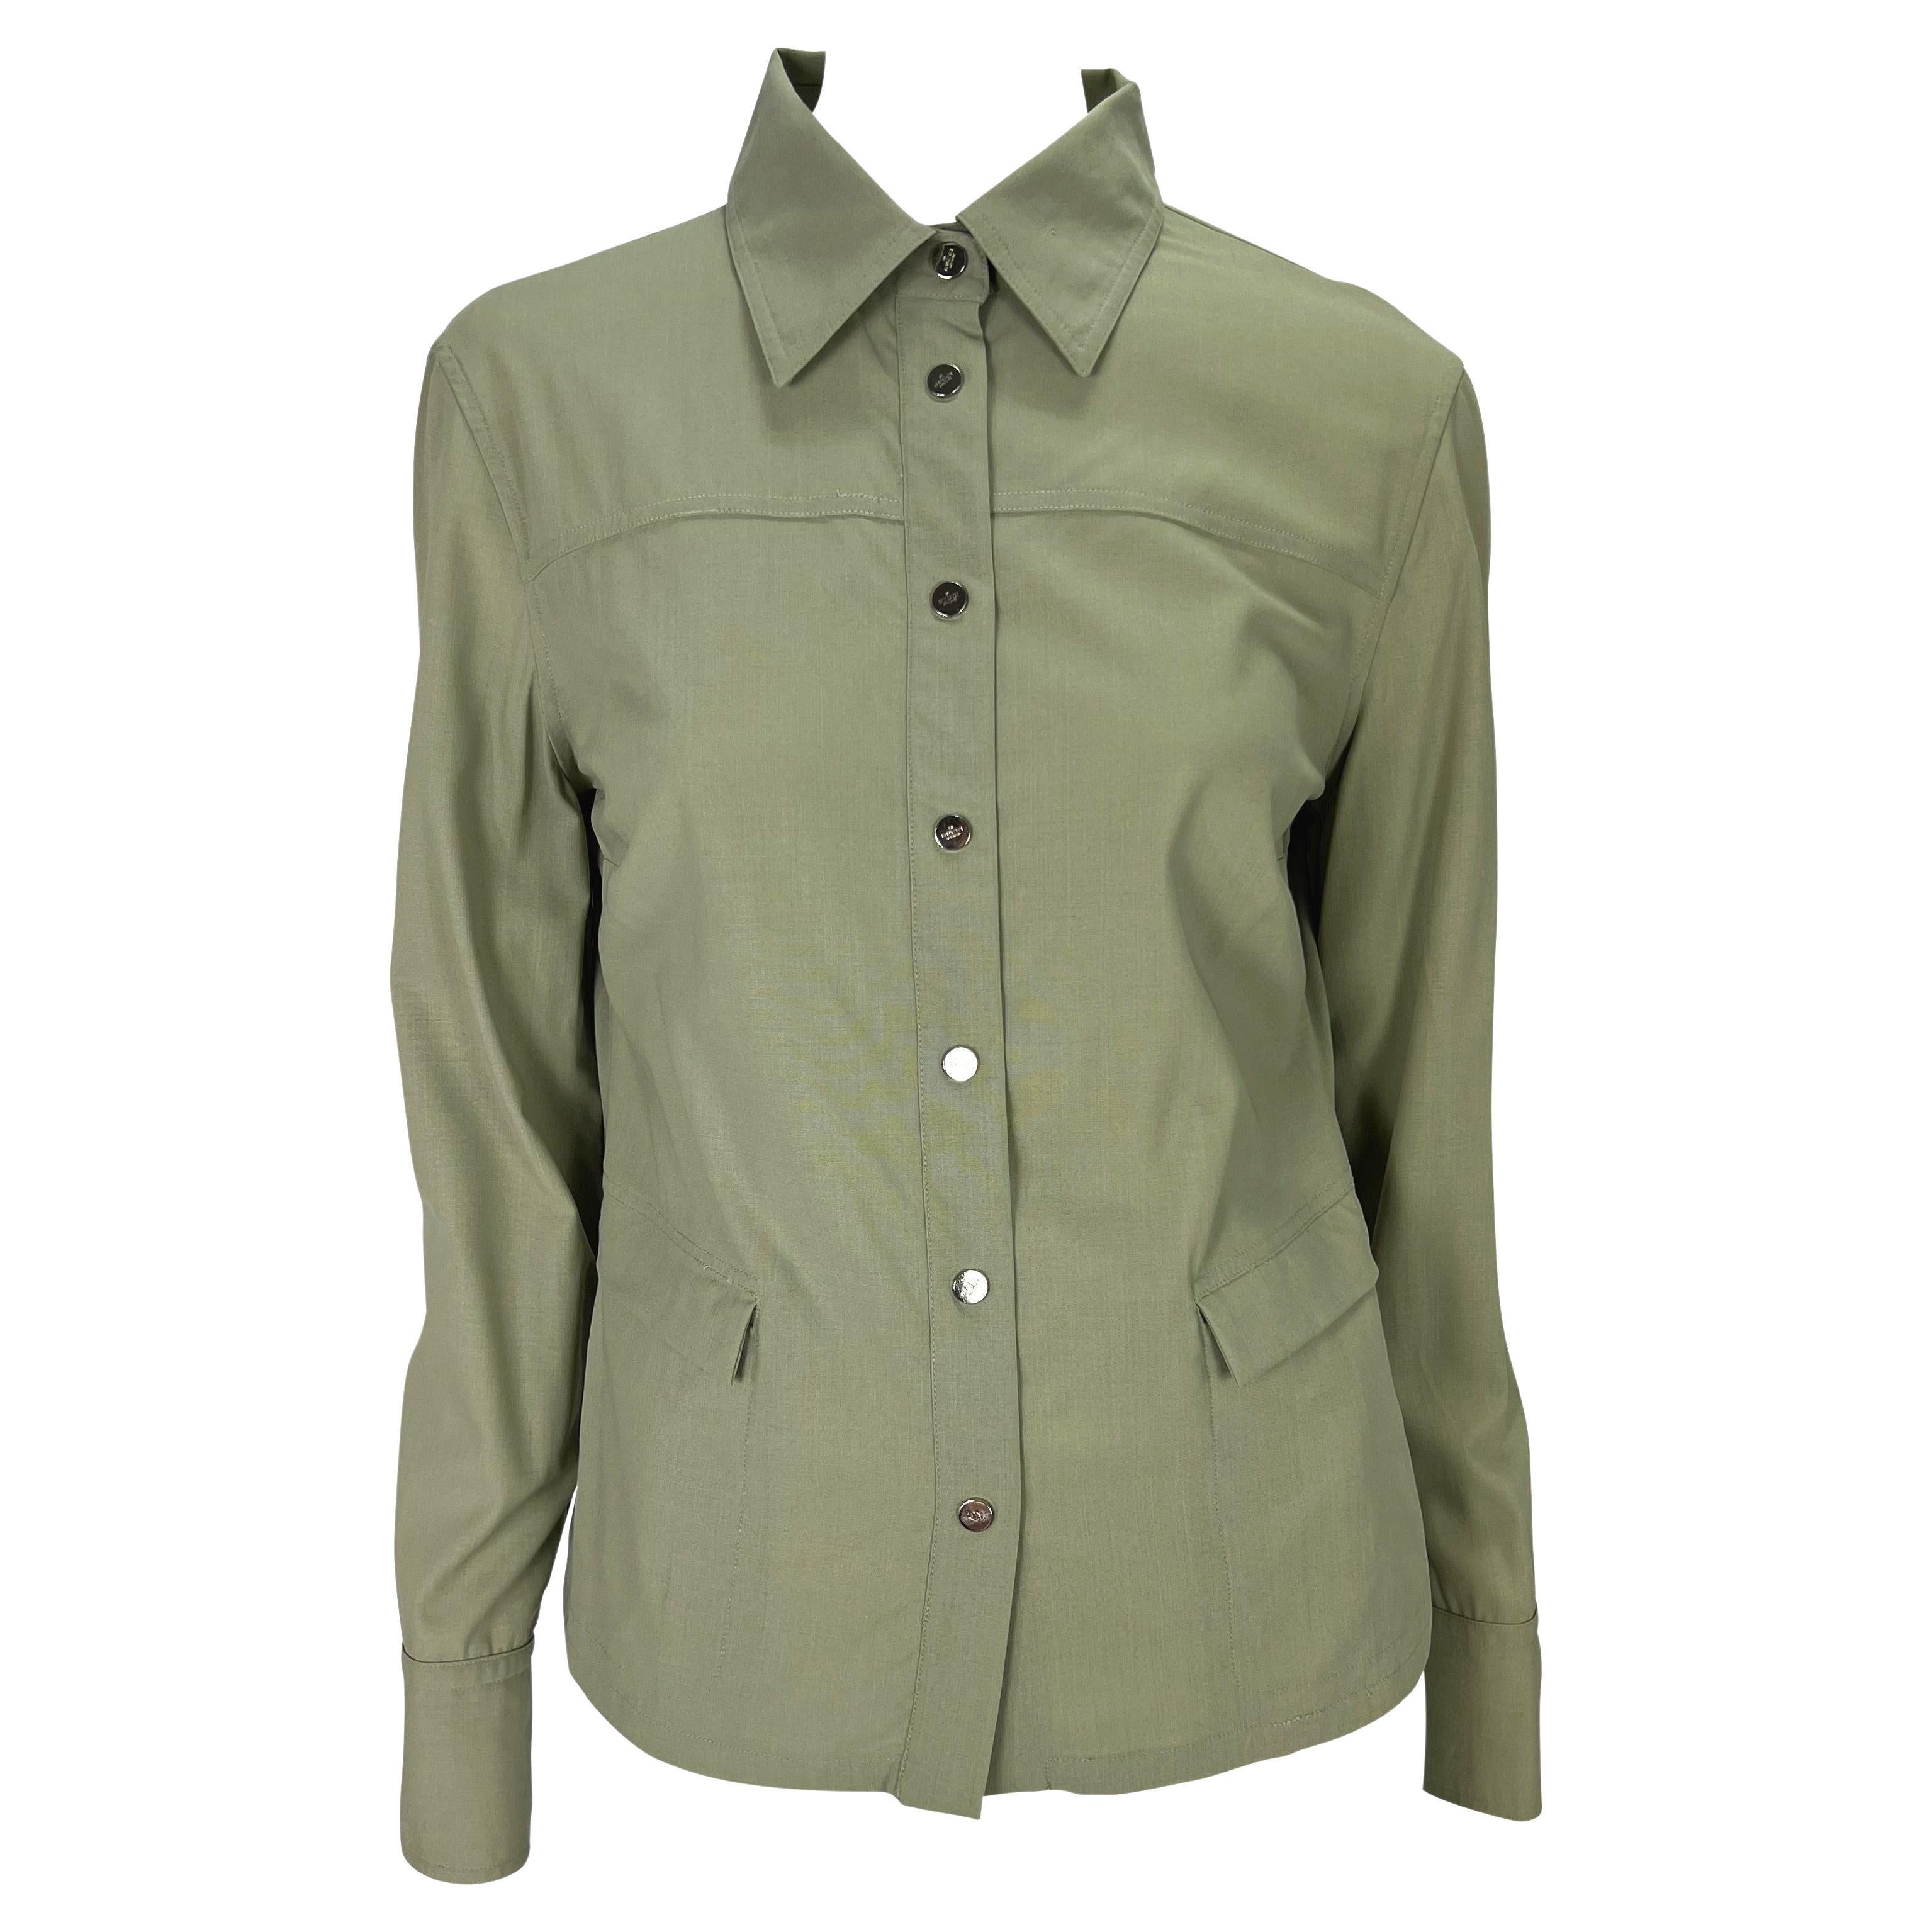 S/S 1999 Gucci by Tom Ford Logo Snap Khaki Pocket Blouse Sample For Sale